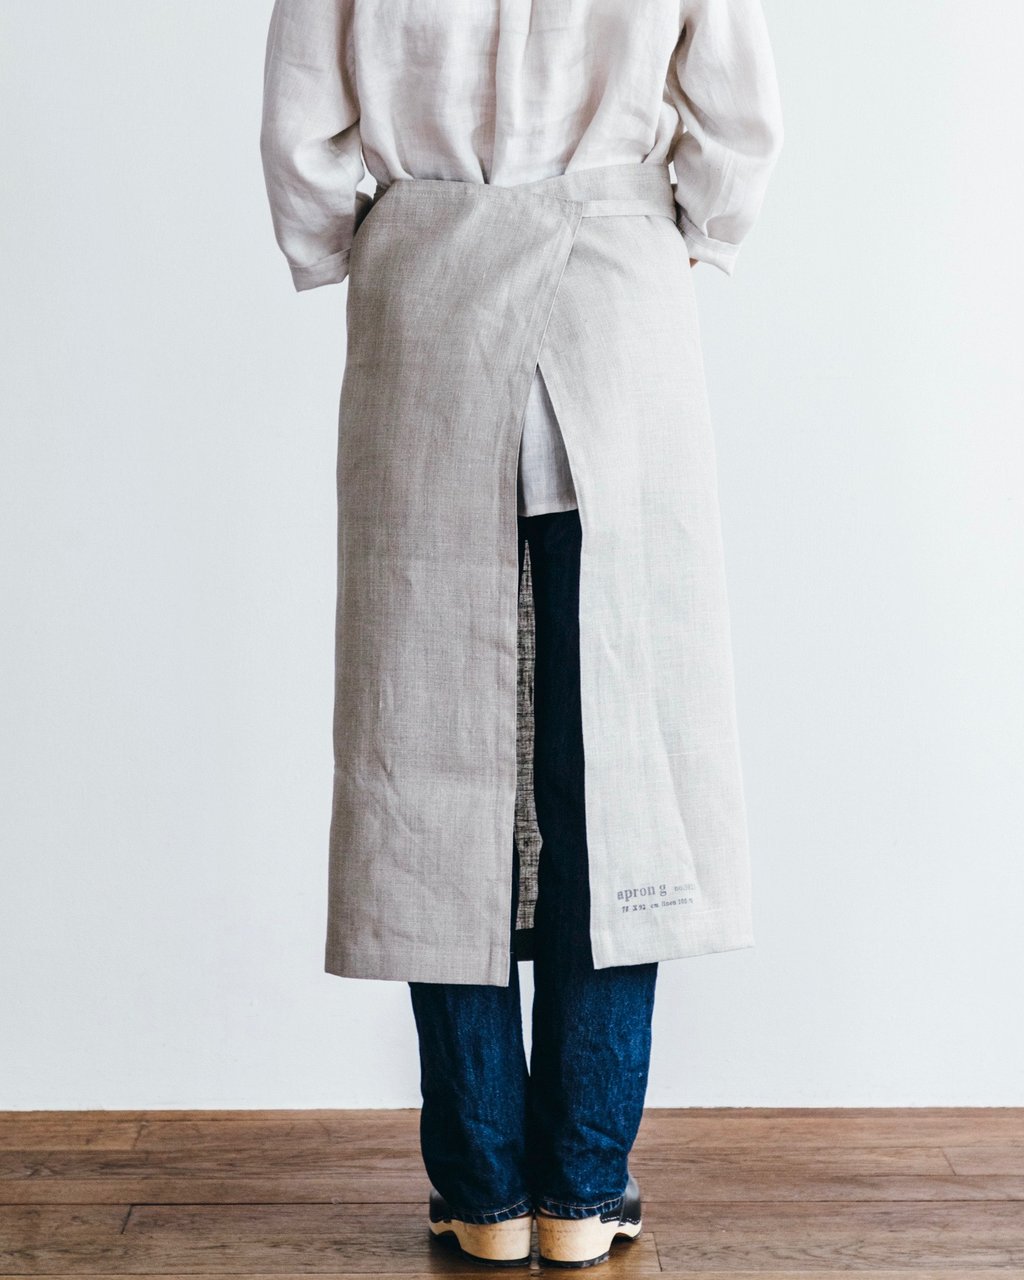 Garcon Apron - flax linen with stamp <br>Fog Linen